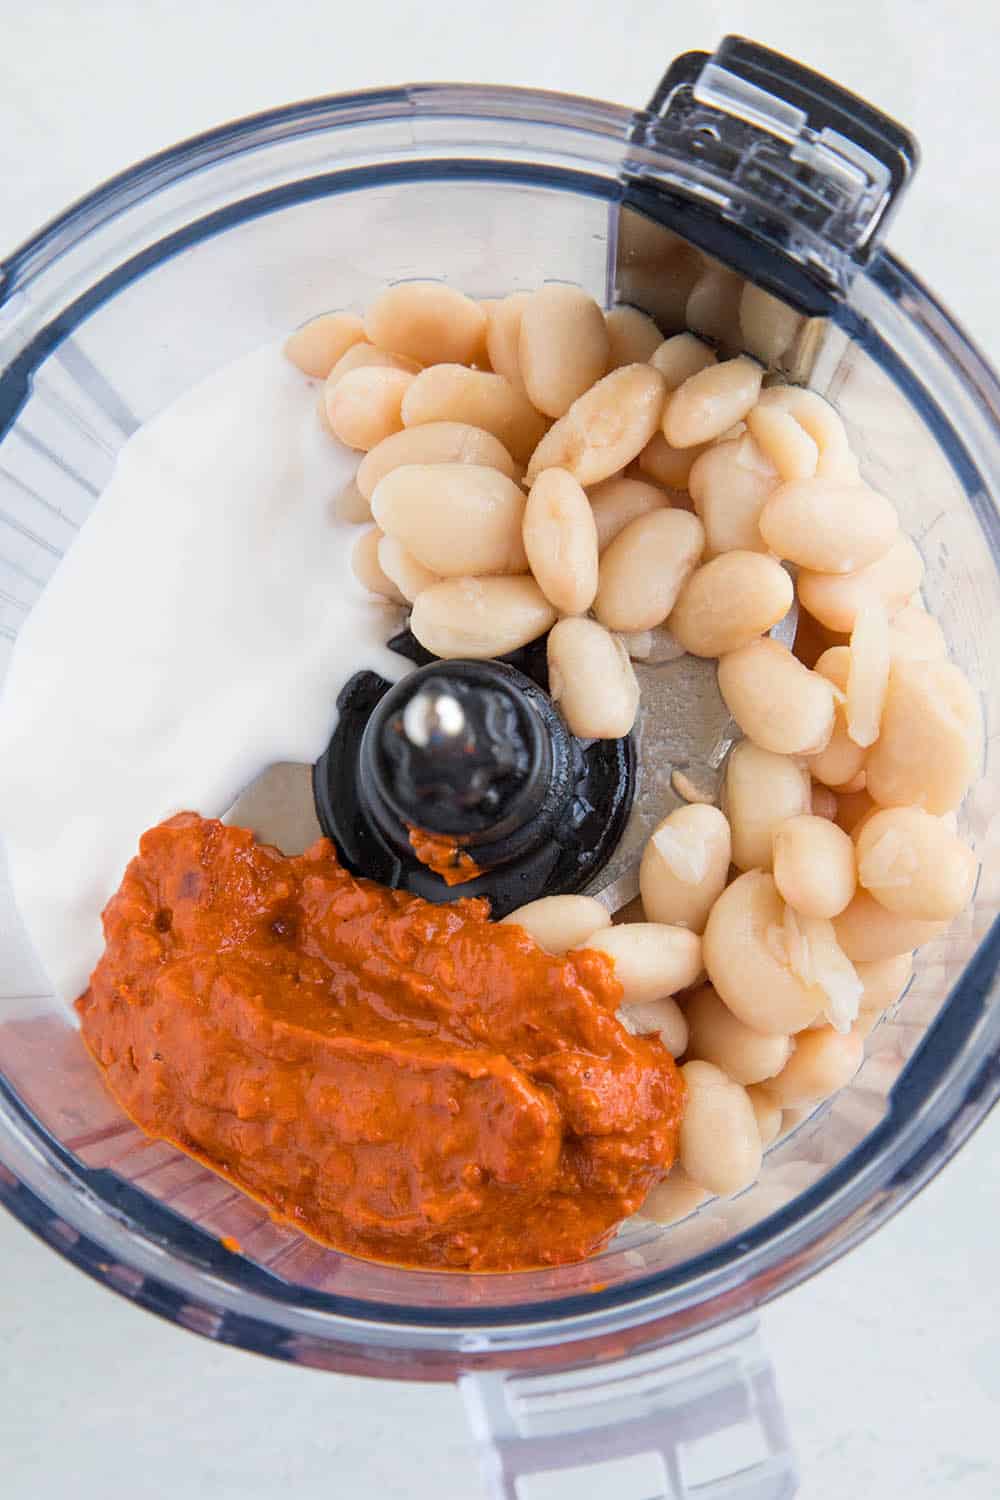 Ingredients for my Creamy White Bean Dip with Harissa recipe in a food processor